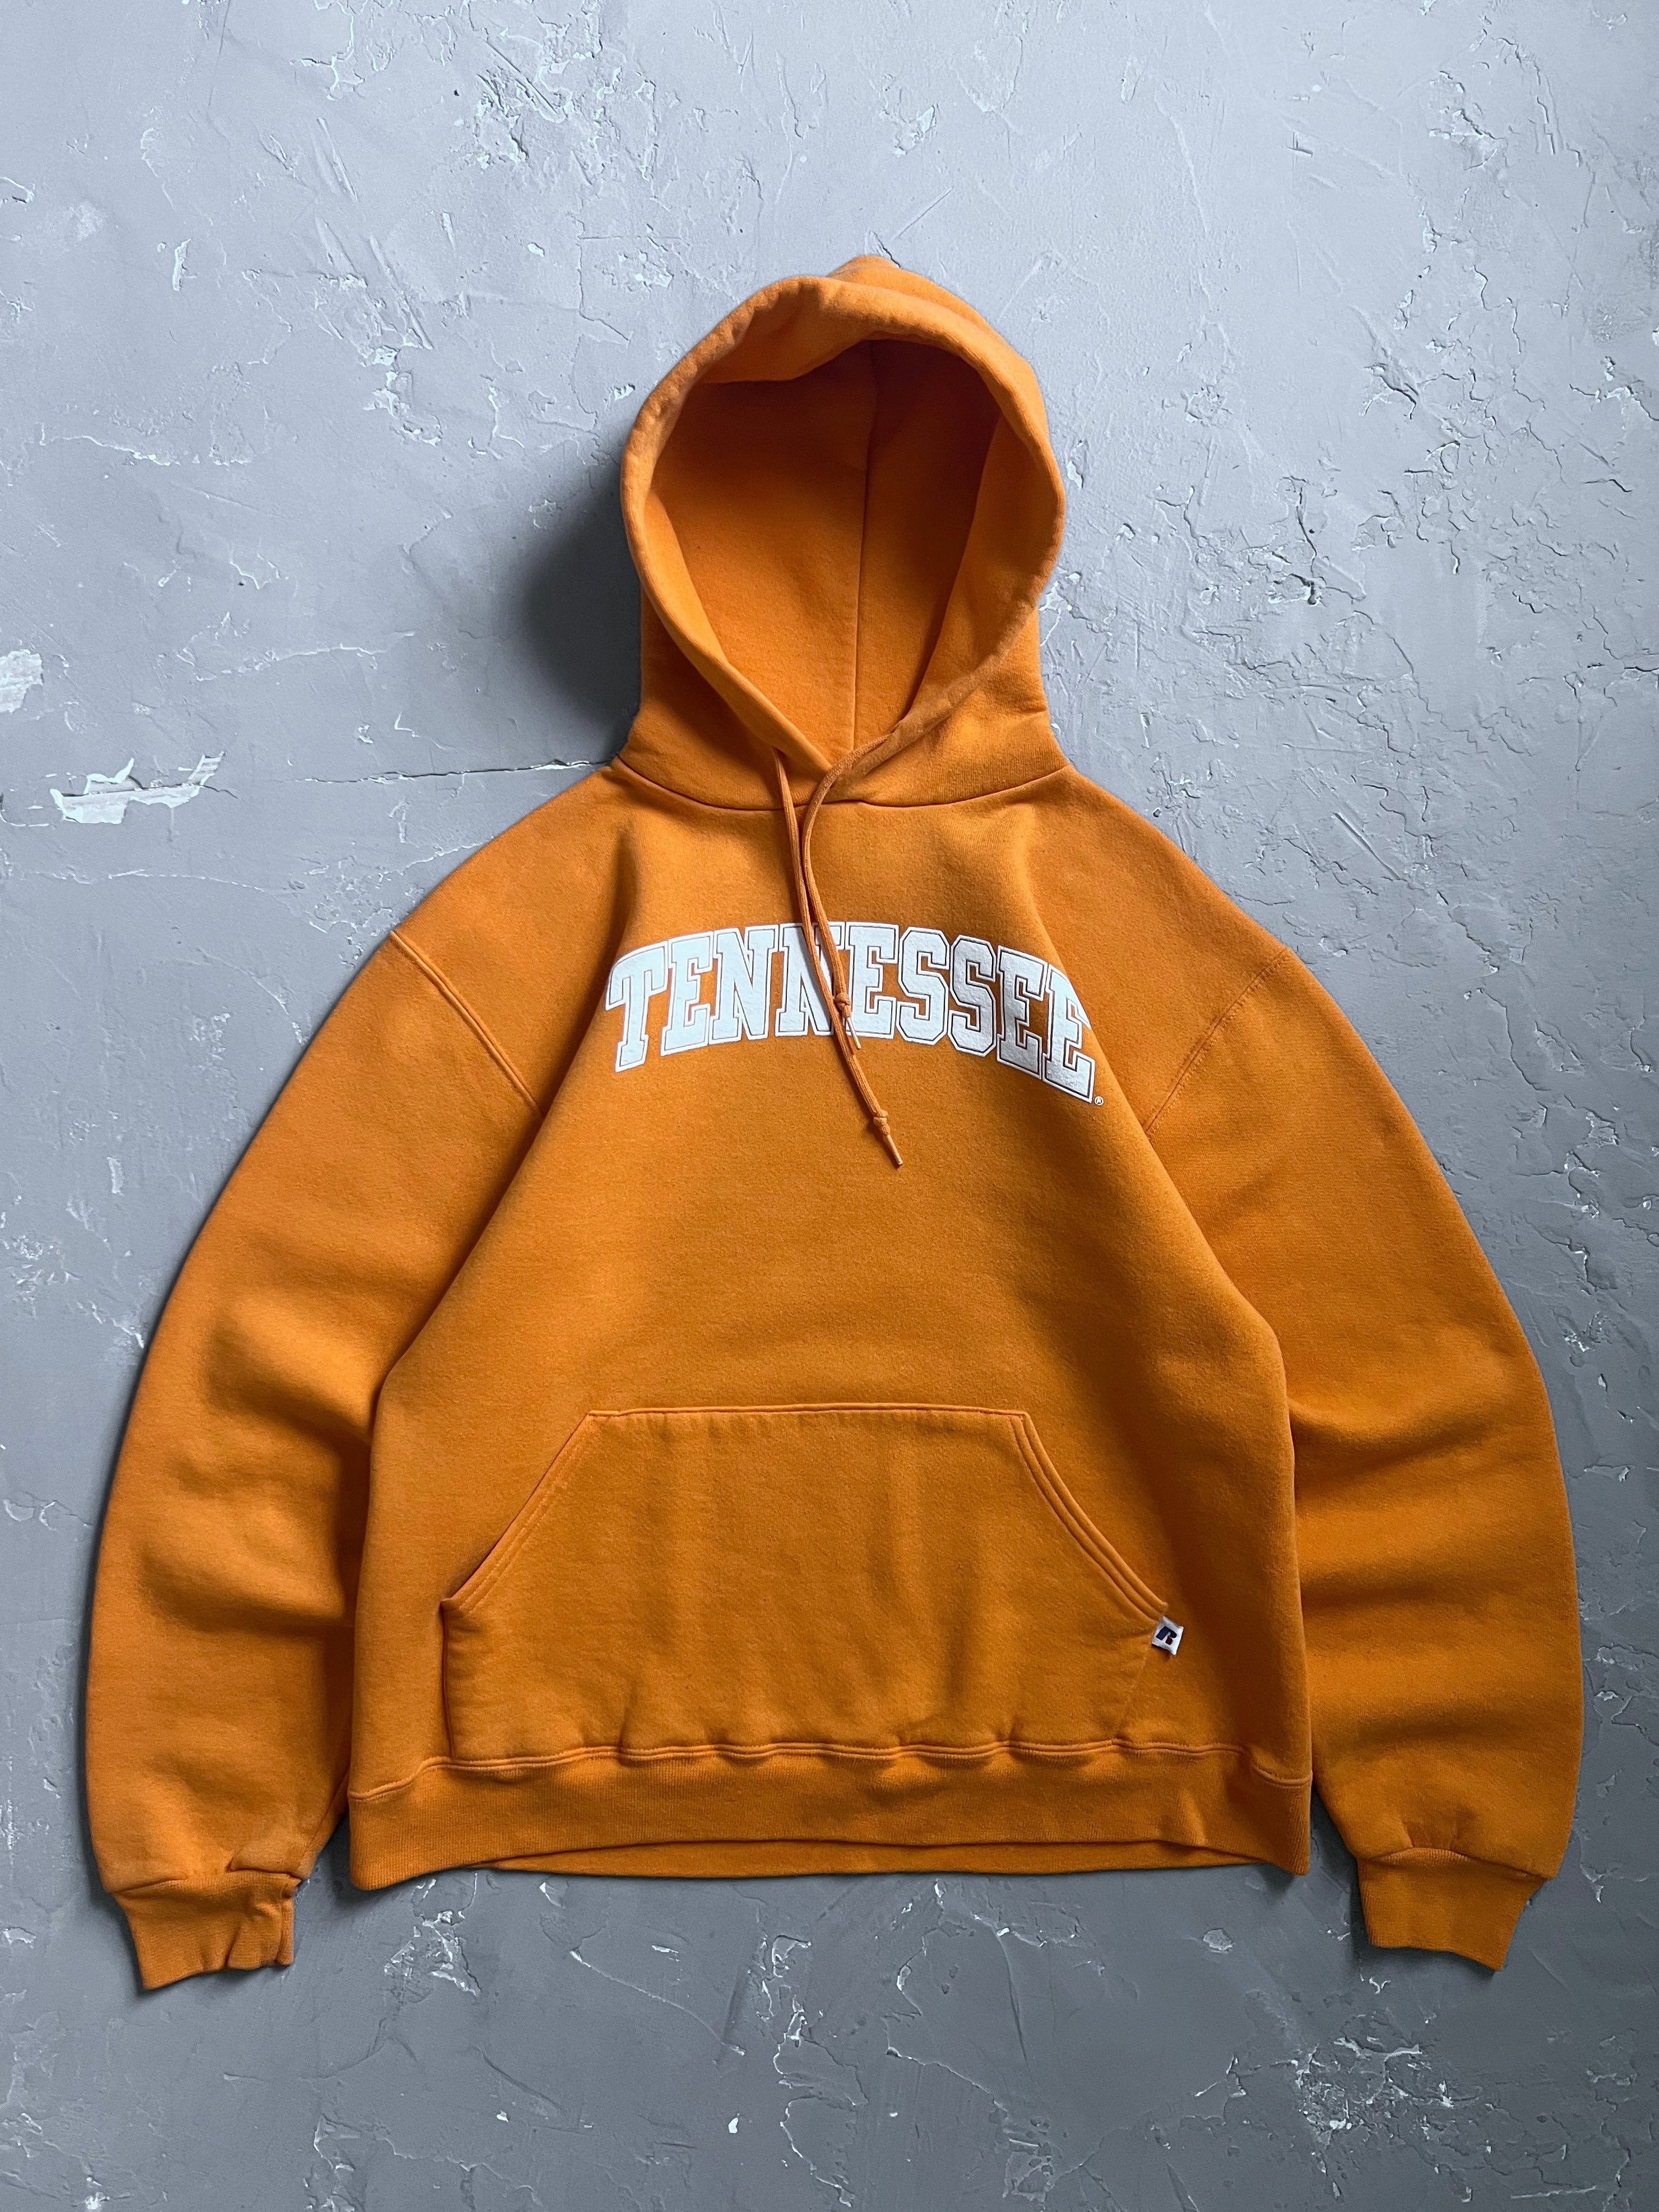 1990s Tennessee Russell Athletic Hoodie [M]